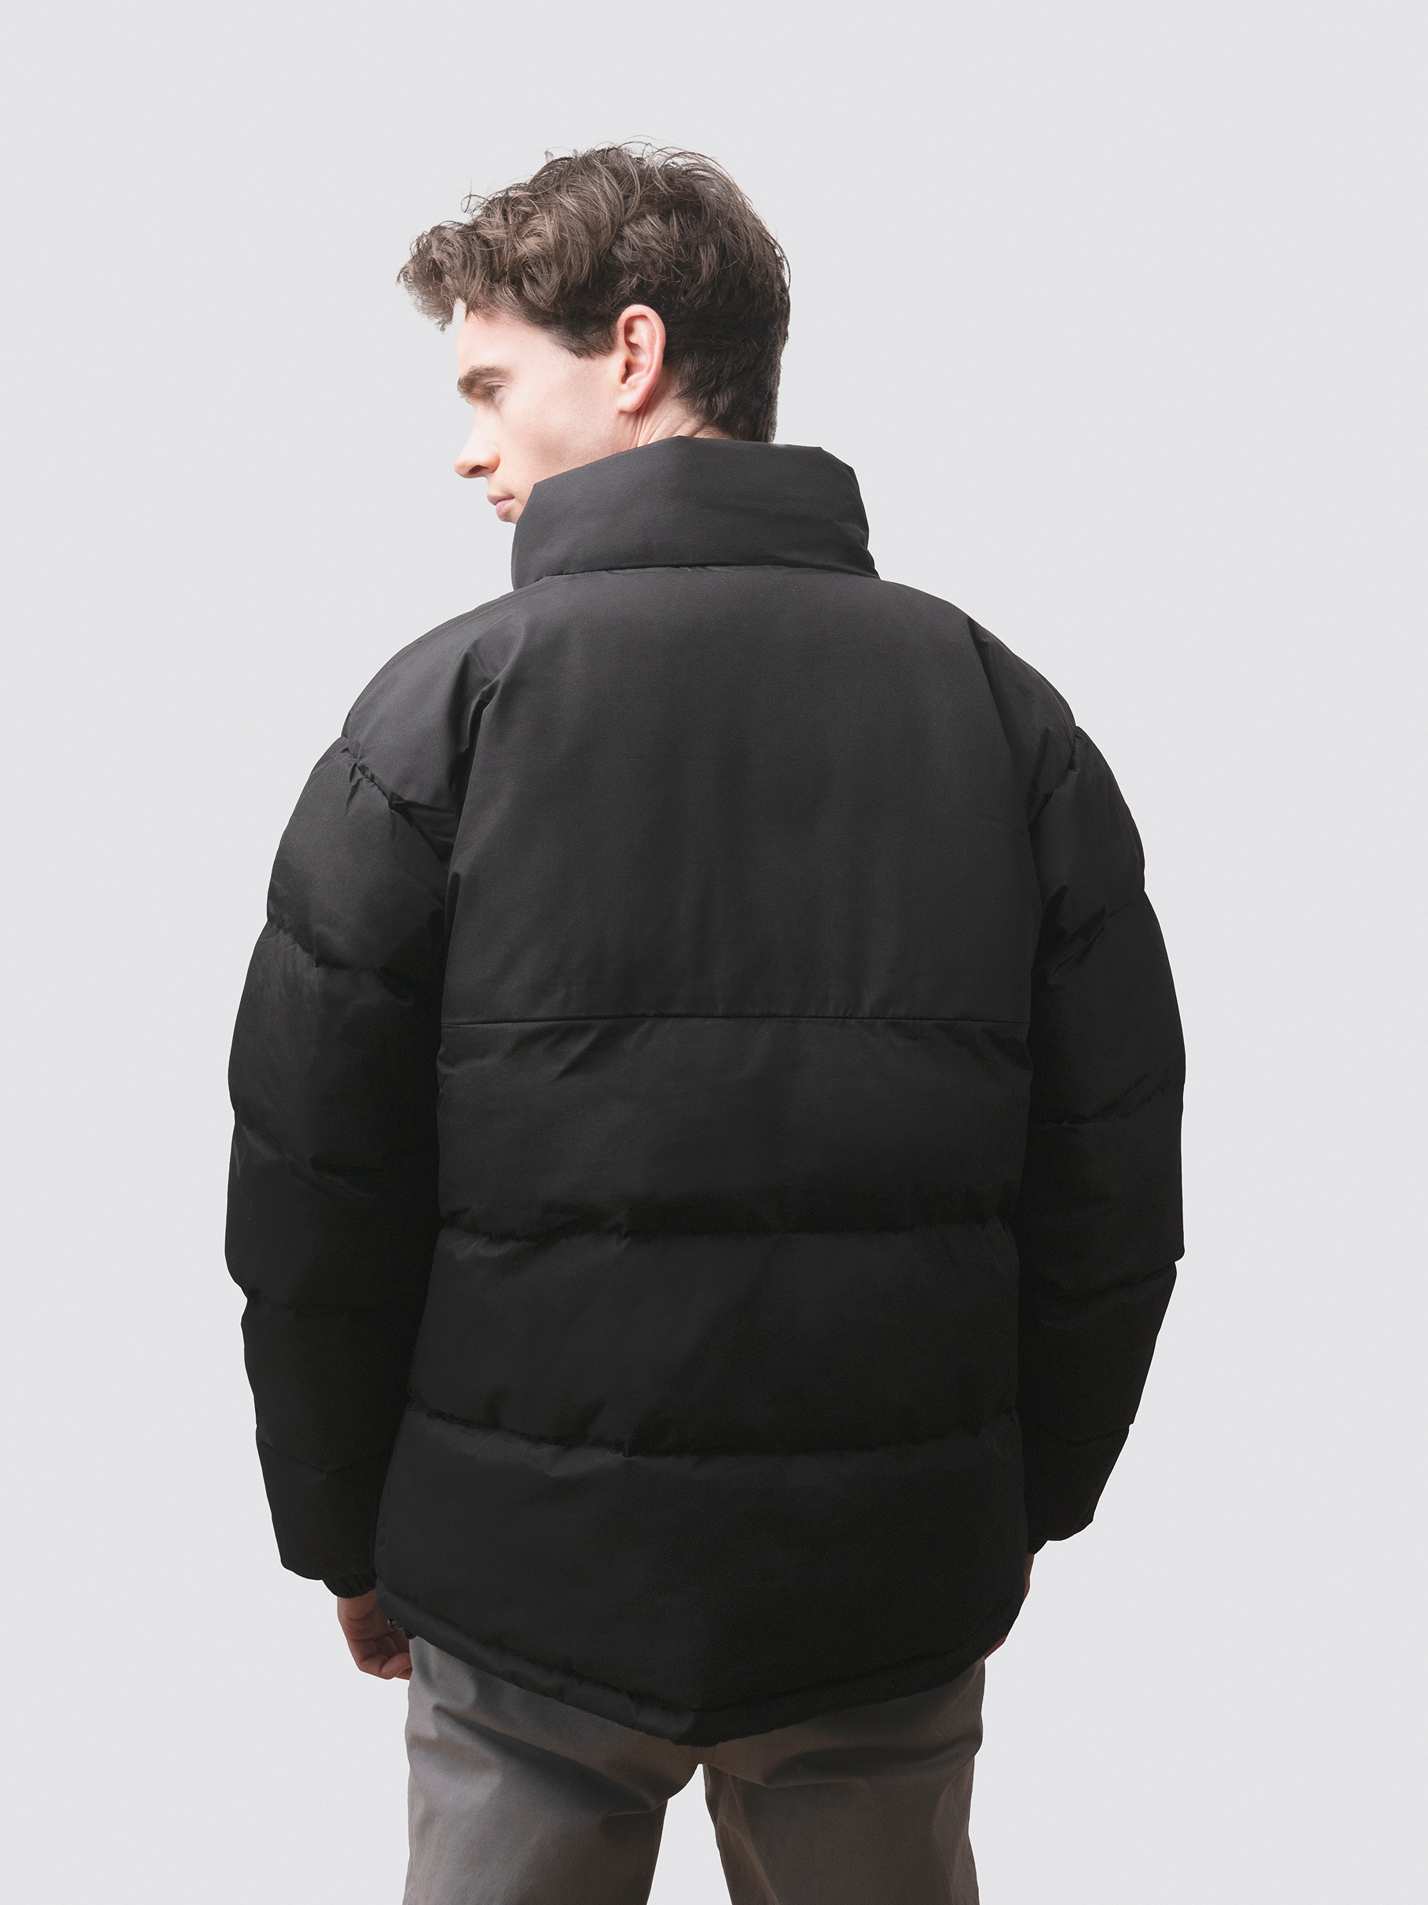 UCL Dance Society Competition Team Men's Puffer Jacket